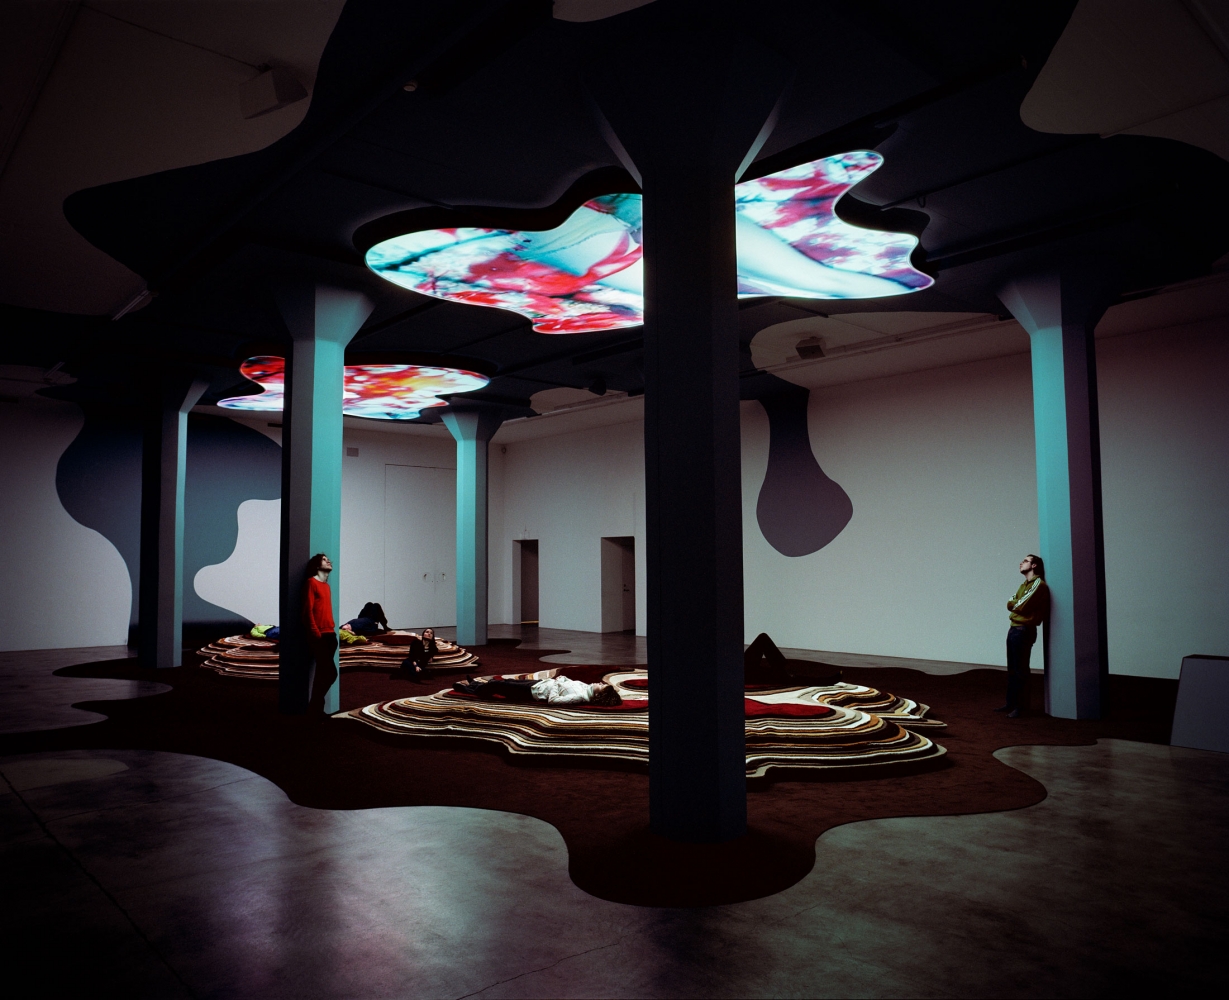 Pipilotti Rist
Tyngdkraft, var min v&amp;auml;n, (Gravity Be My Friend), 2007
Two-channel video and sound installation, color, with two amorphous screens and two carpet sculptures
Duration: 12 minutes
Dimensions adaptable
Installation view, Magasin III, Stockholm, 2007
Photo: Johan Warden